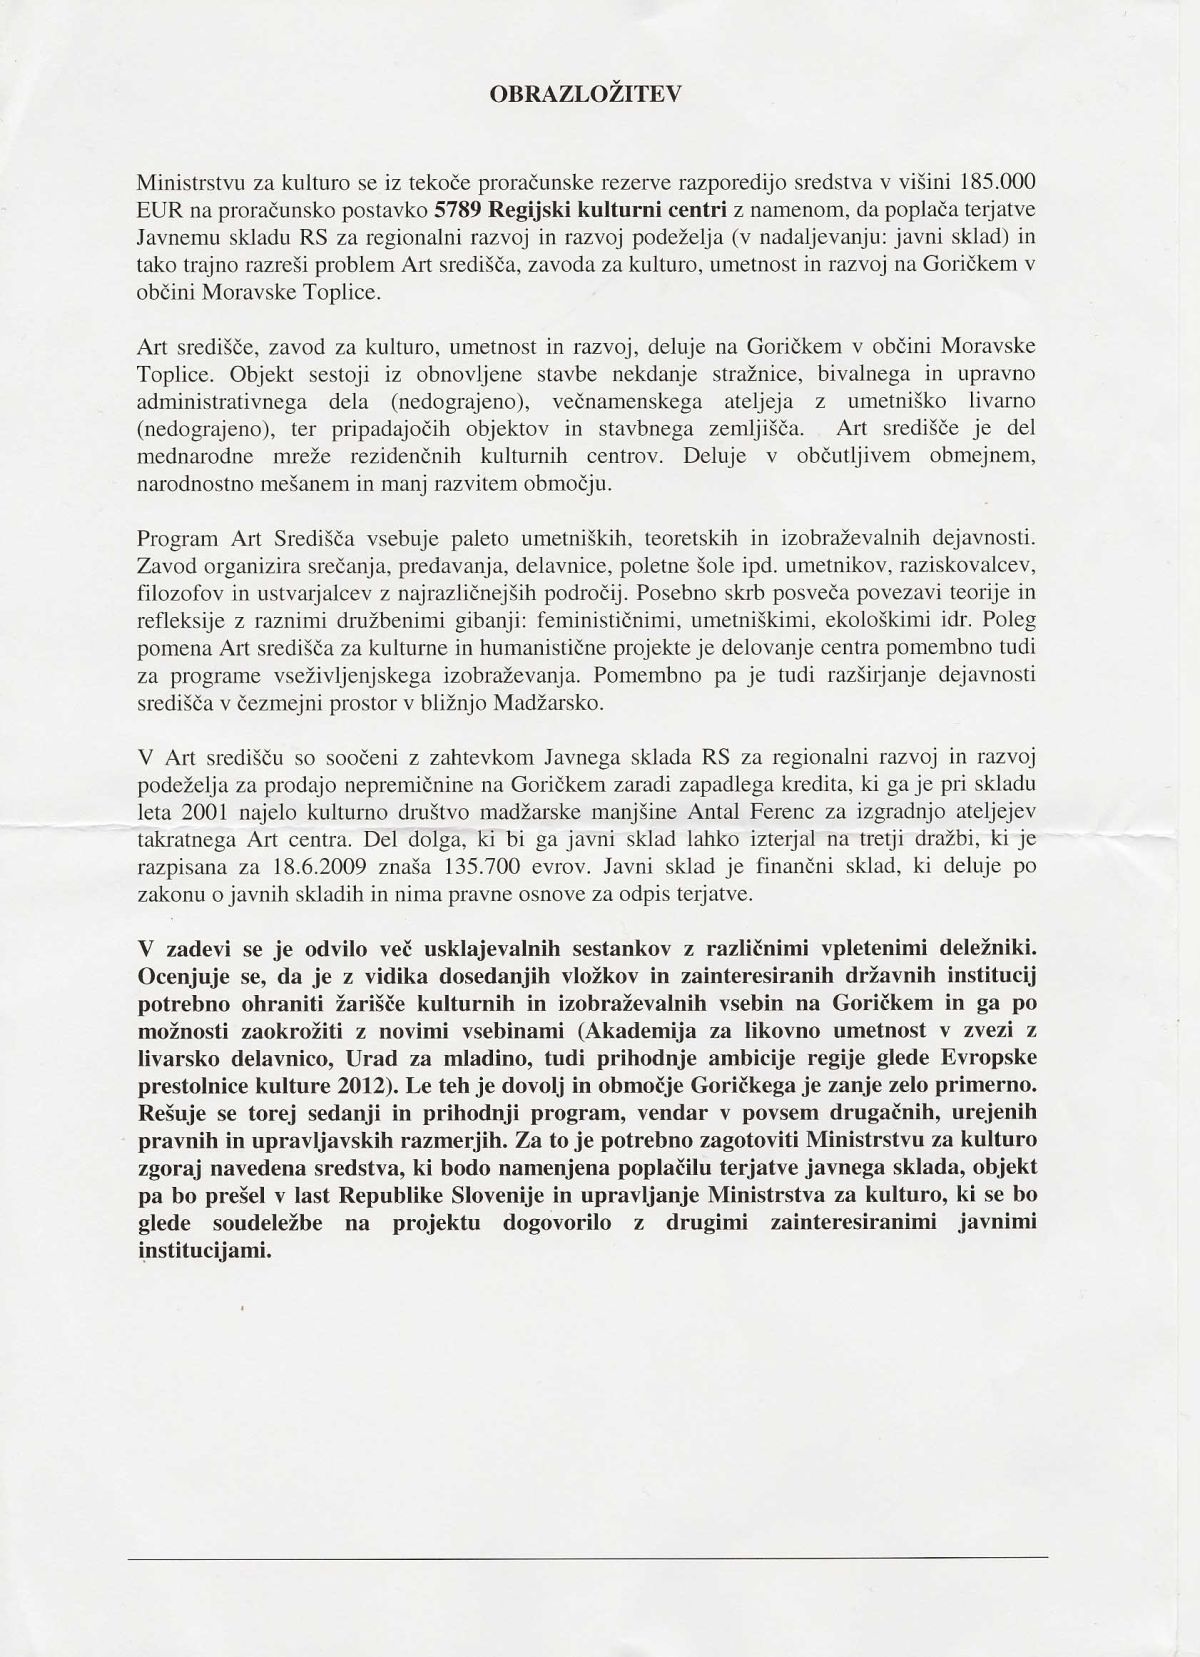 Government resolution on the settlement of the Art Center's debt to the Development Fund – explanation, July 2009.